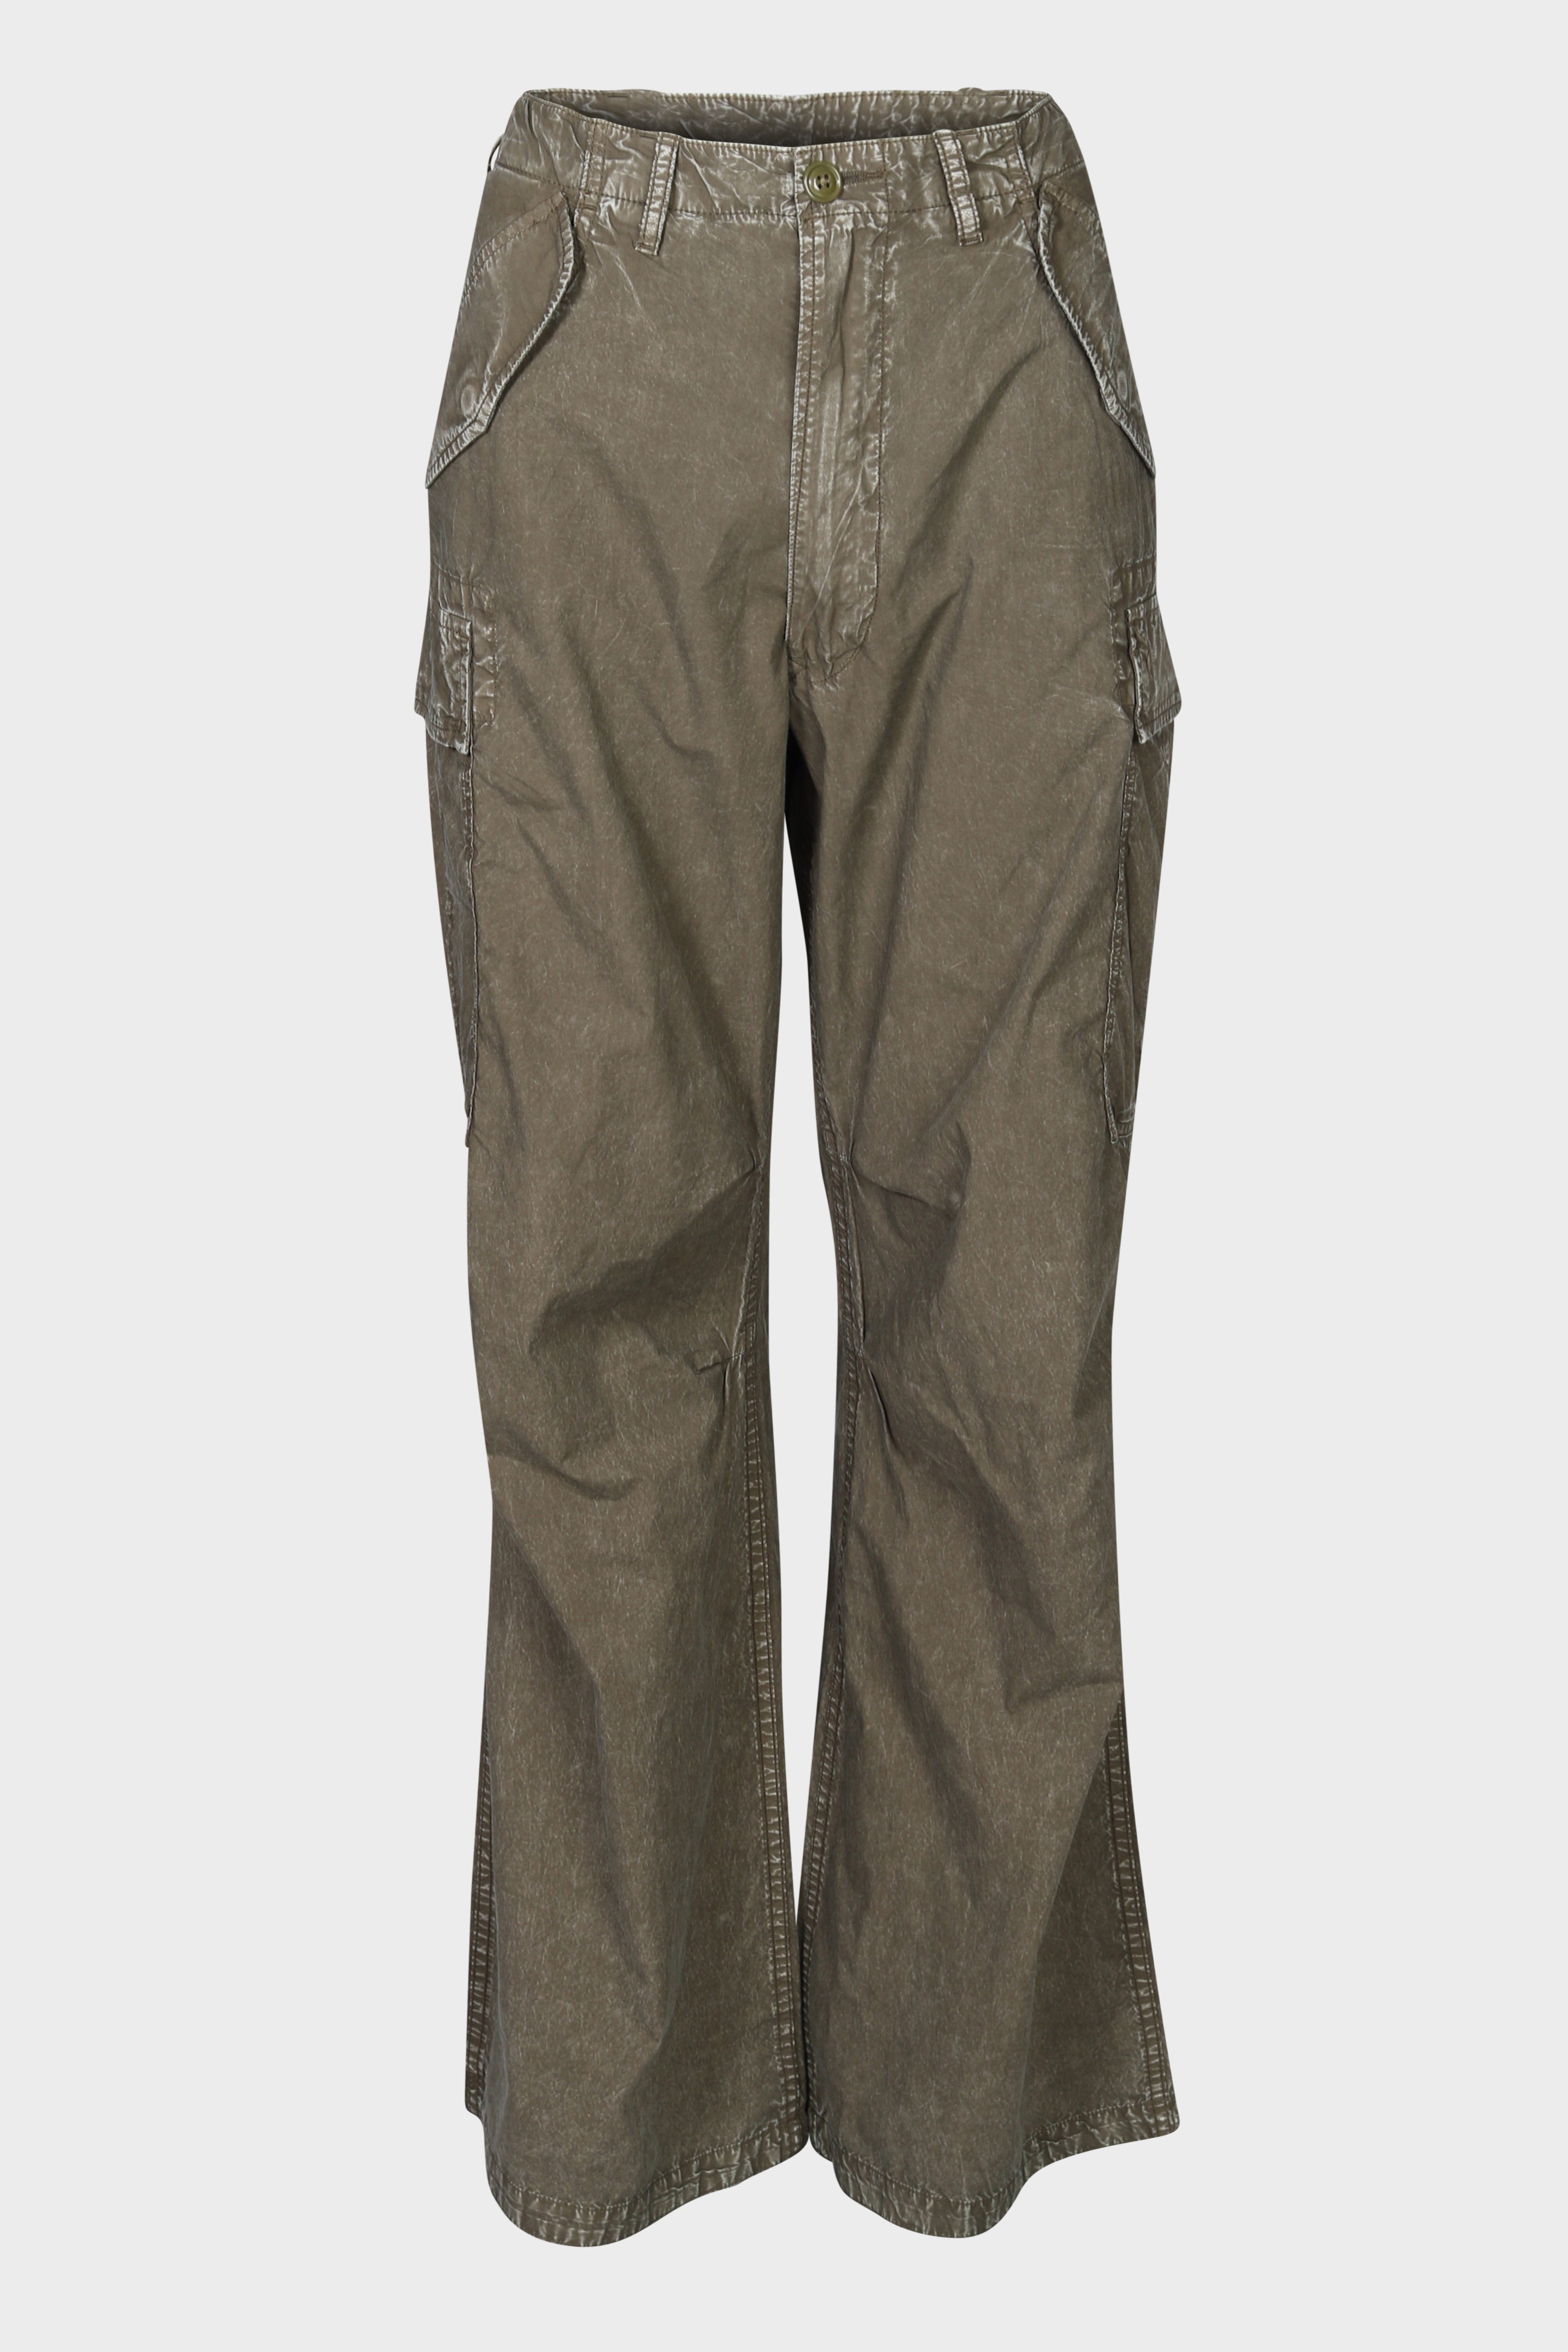 R13 Wide Leg Cargo Pant in Washed Olive 28